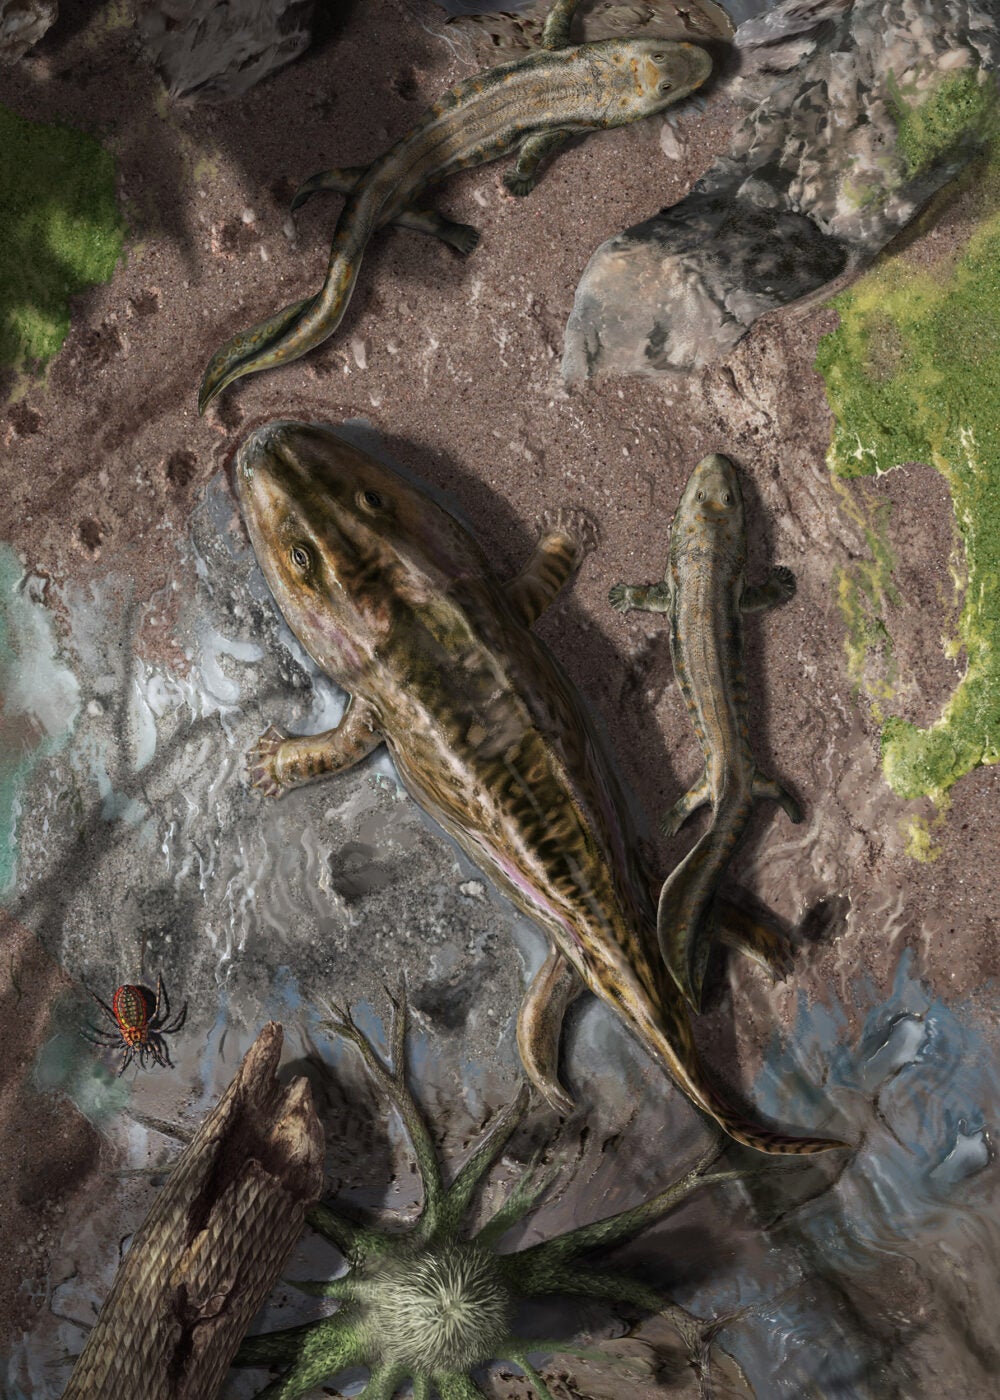 Two Late Devonian early tetrapods illustration.